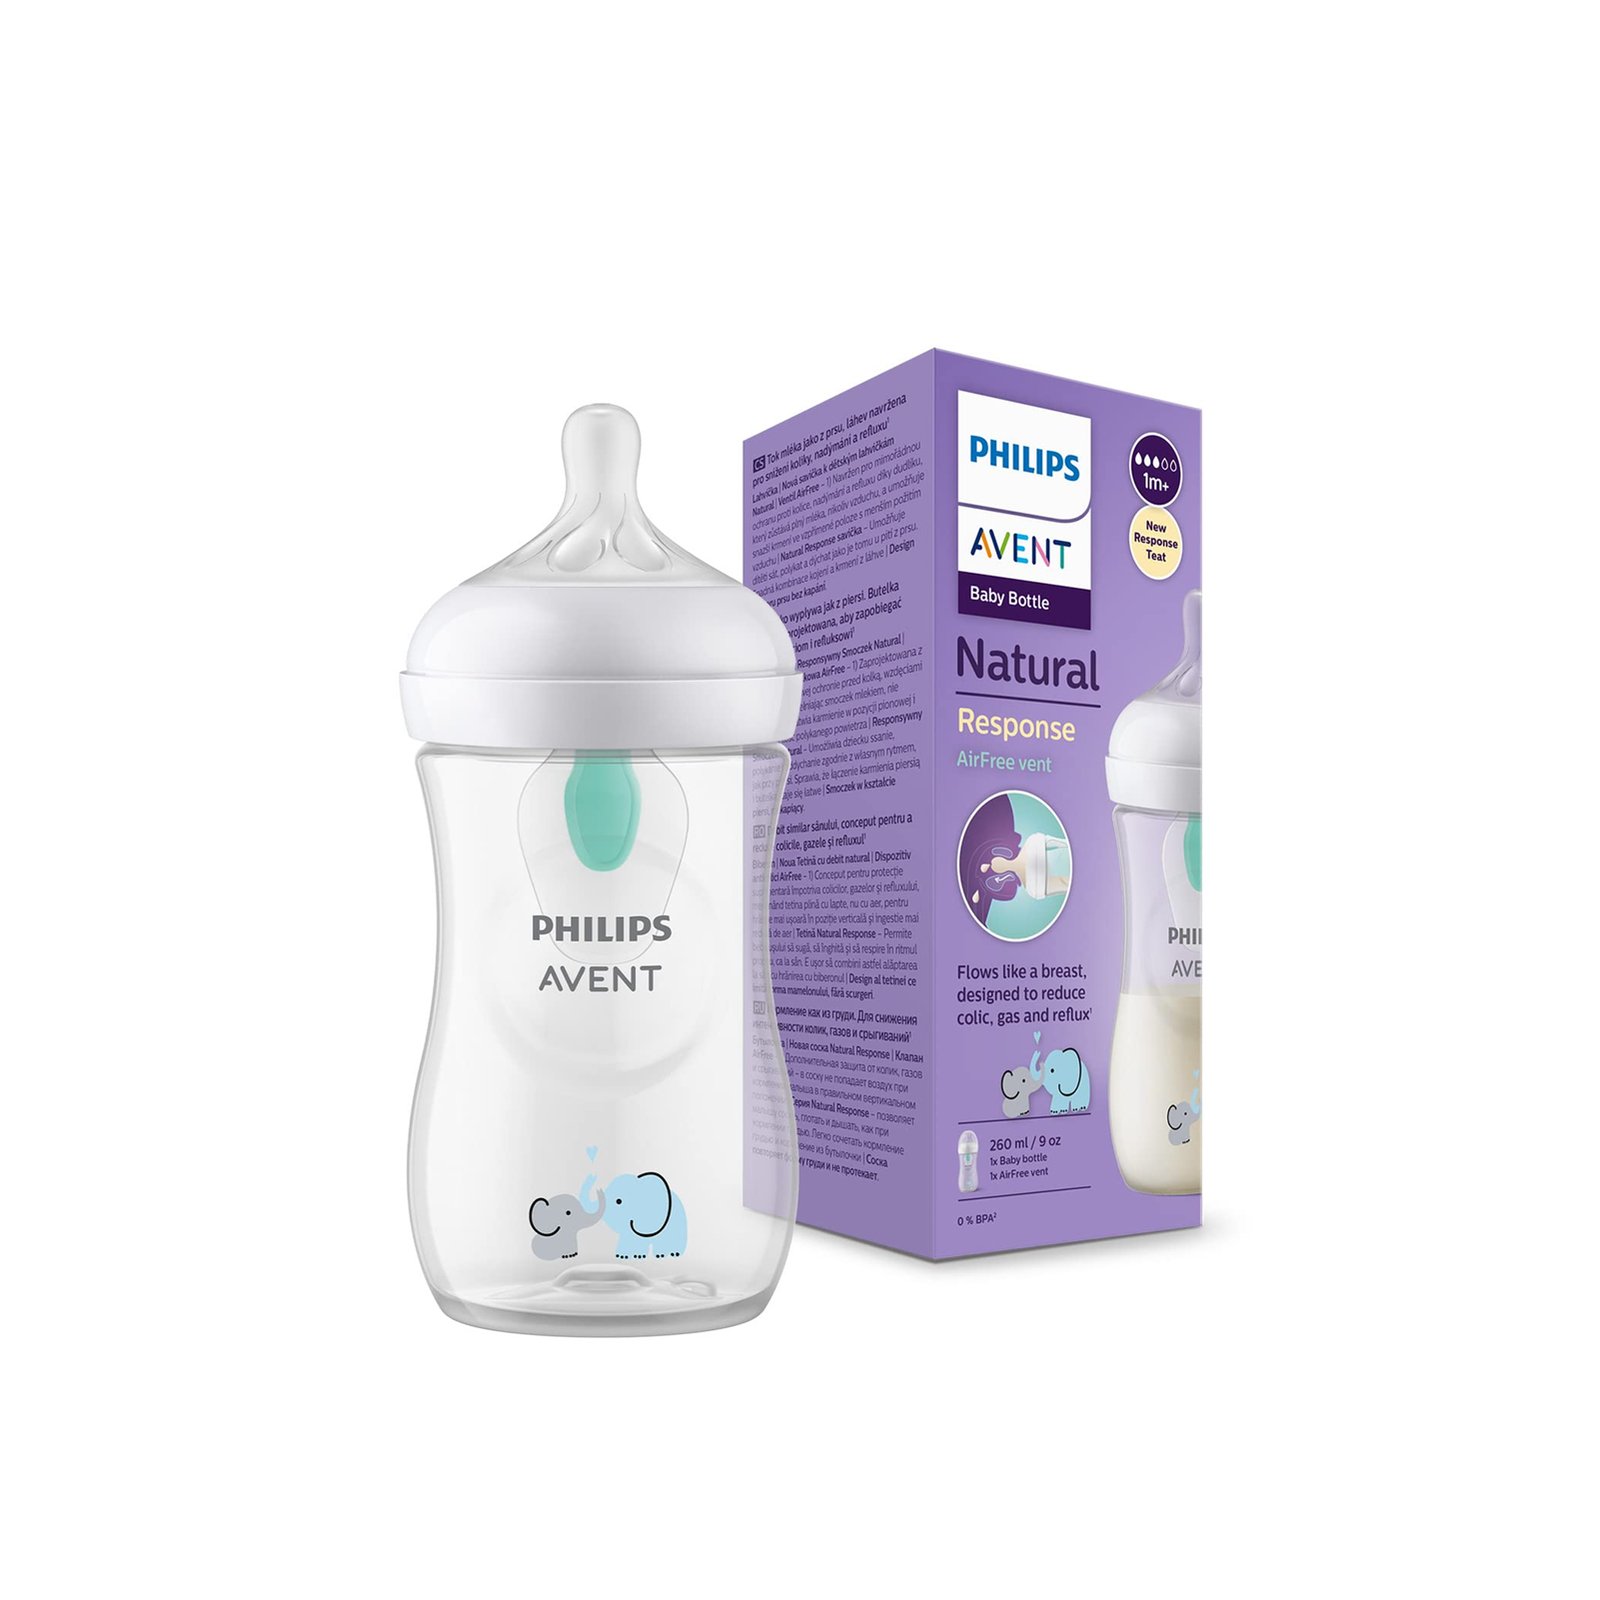 https://static.beautytocare.com/cdn-cgi/image/width=1600,height=1600,f=auto/media/catalog/product//p/h/philips-avent-natural-response-airfree-vent-baby-bottle-1m-elephant-260ml.png